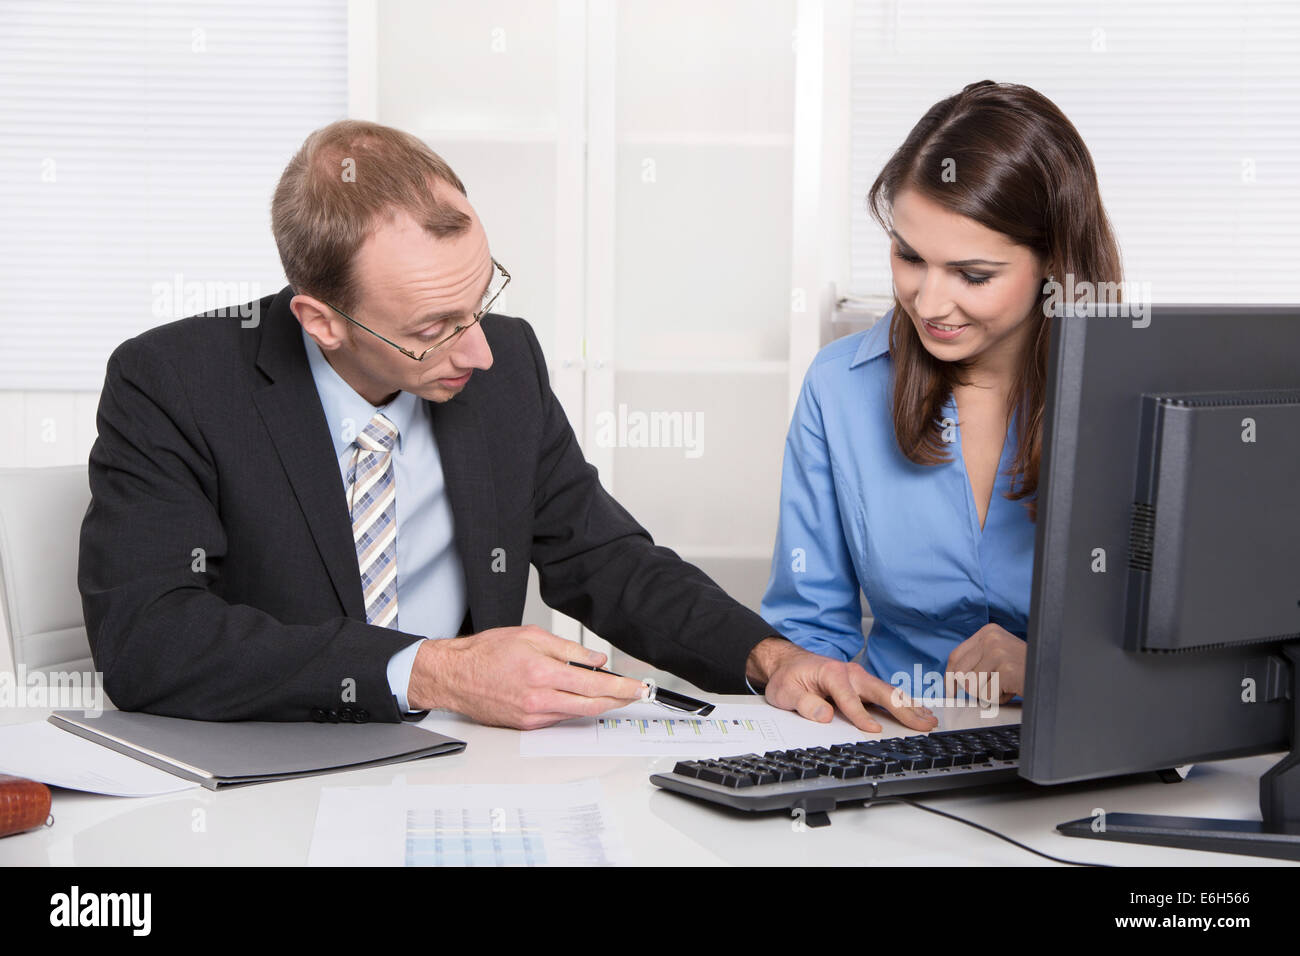 Successful team in the office - man and woman. Stock Photo